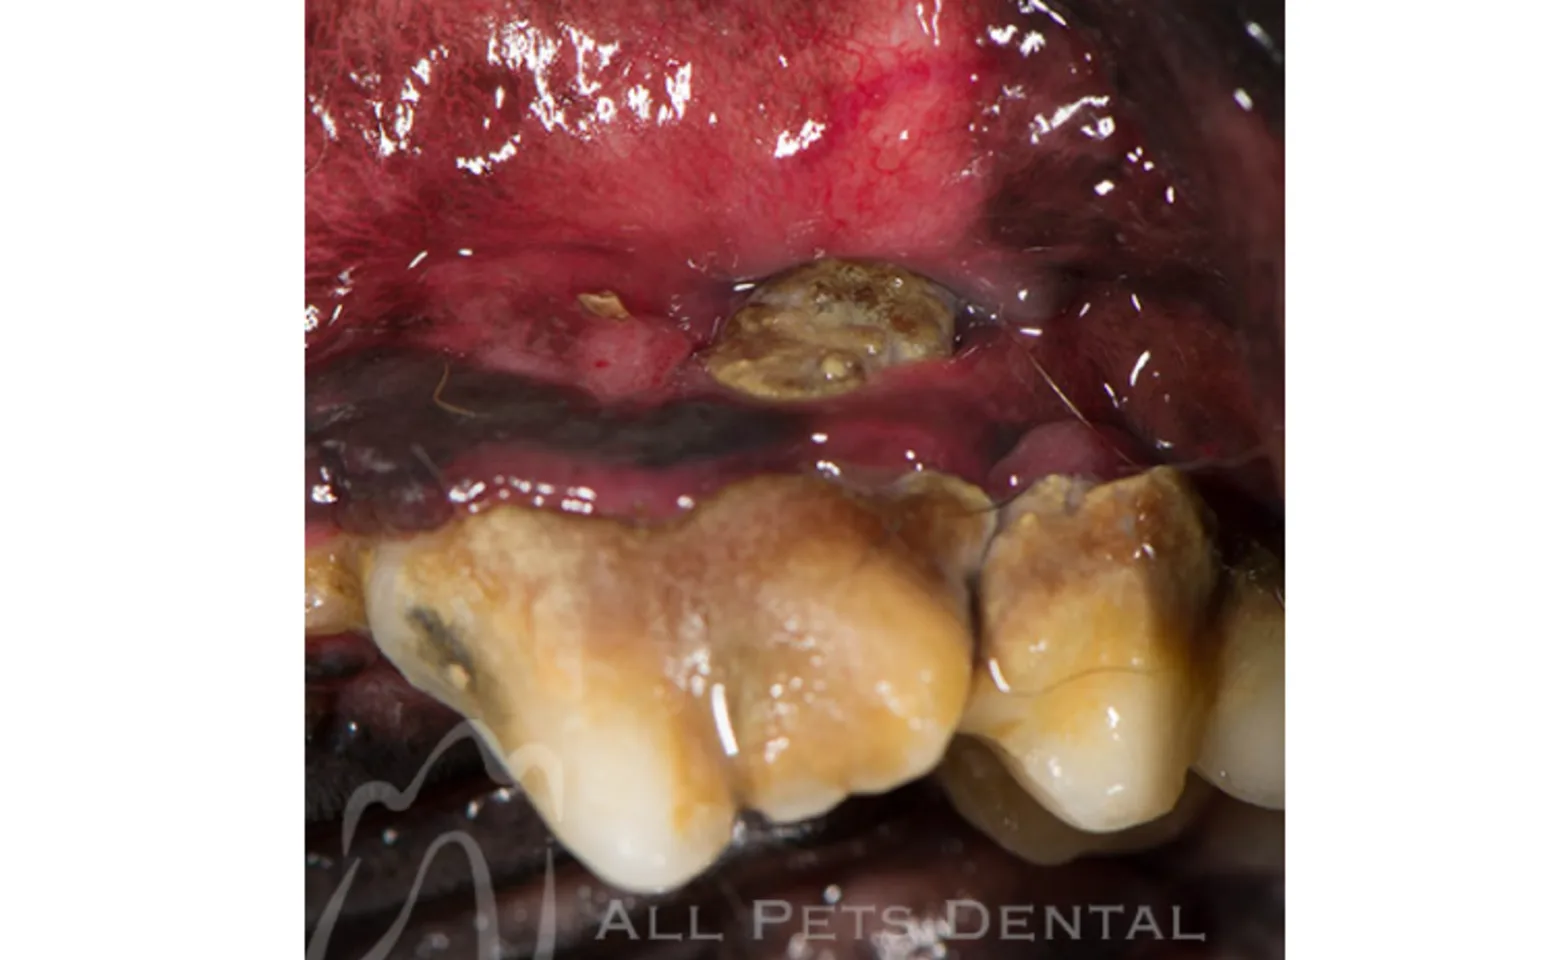 Example of Mucogingival Defects